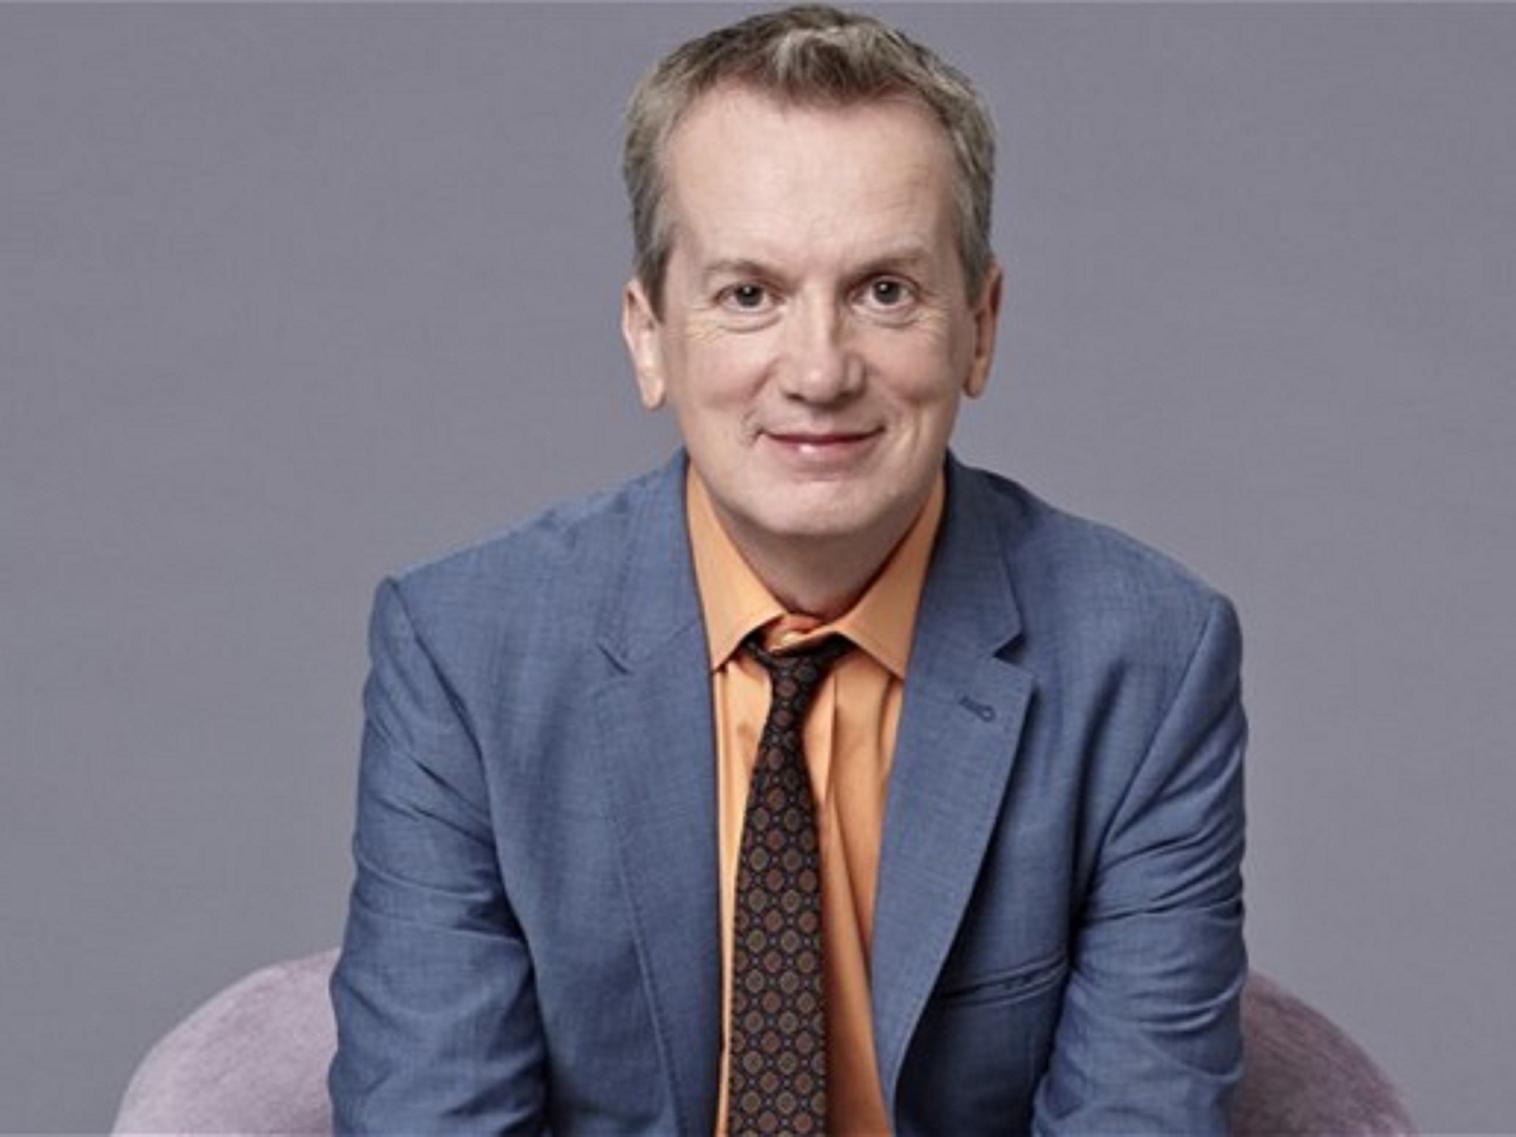 Frank Skinner brings his sellout tour to Halifax